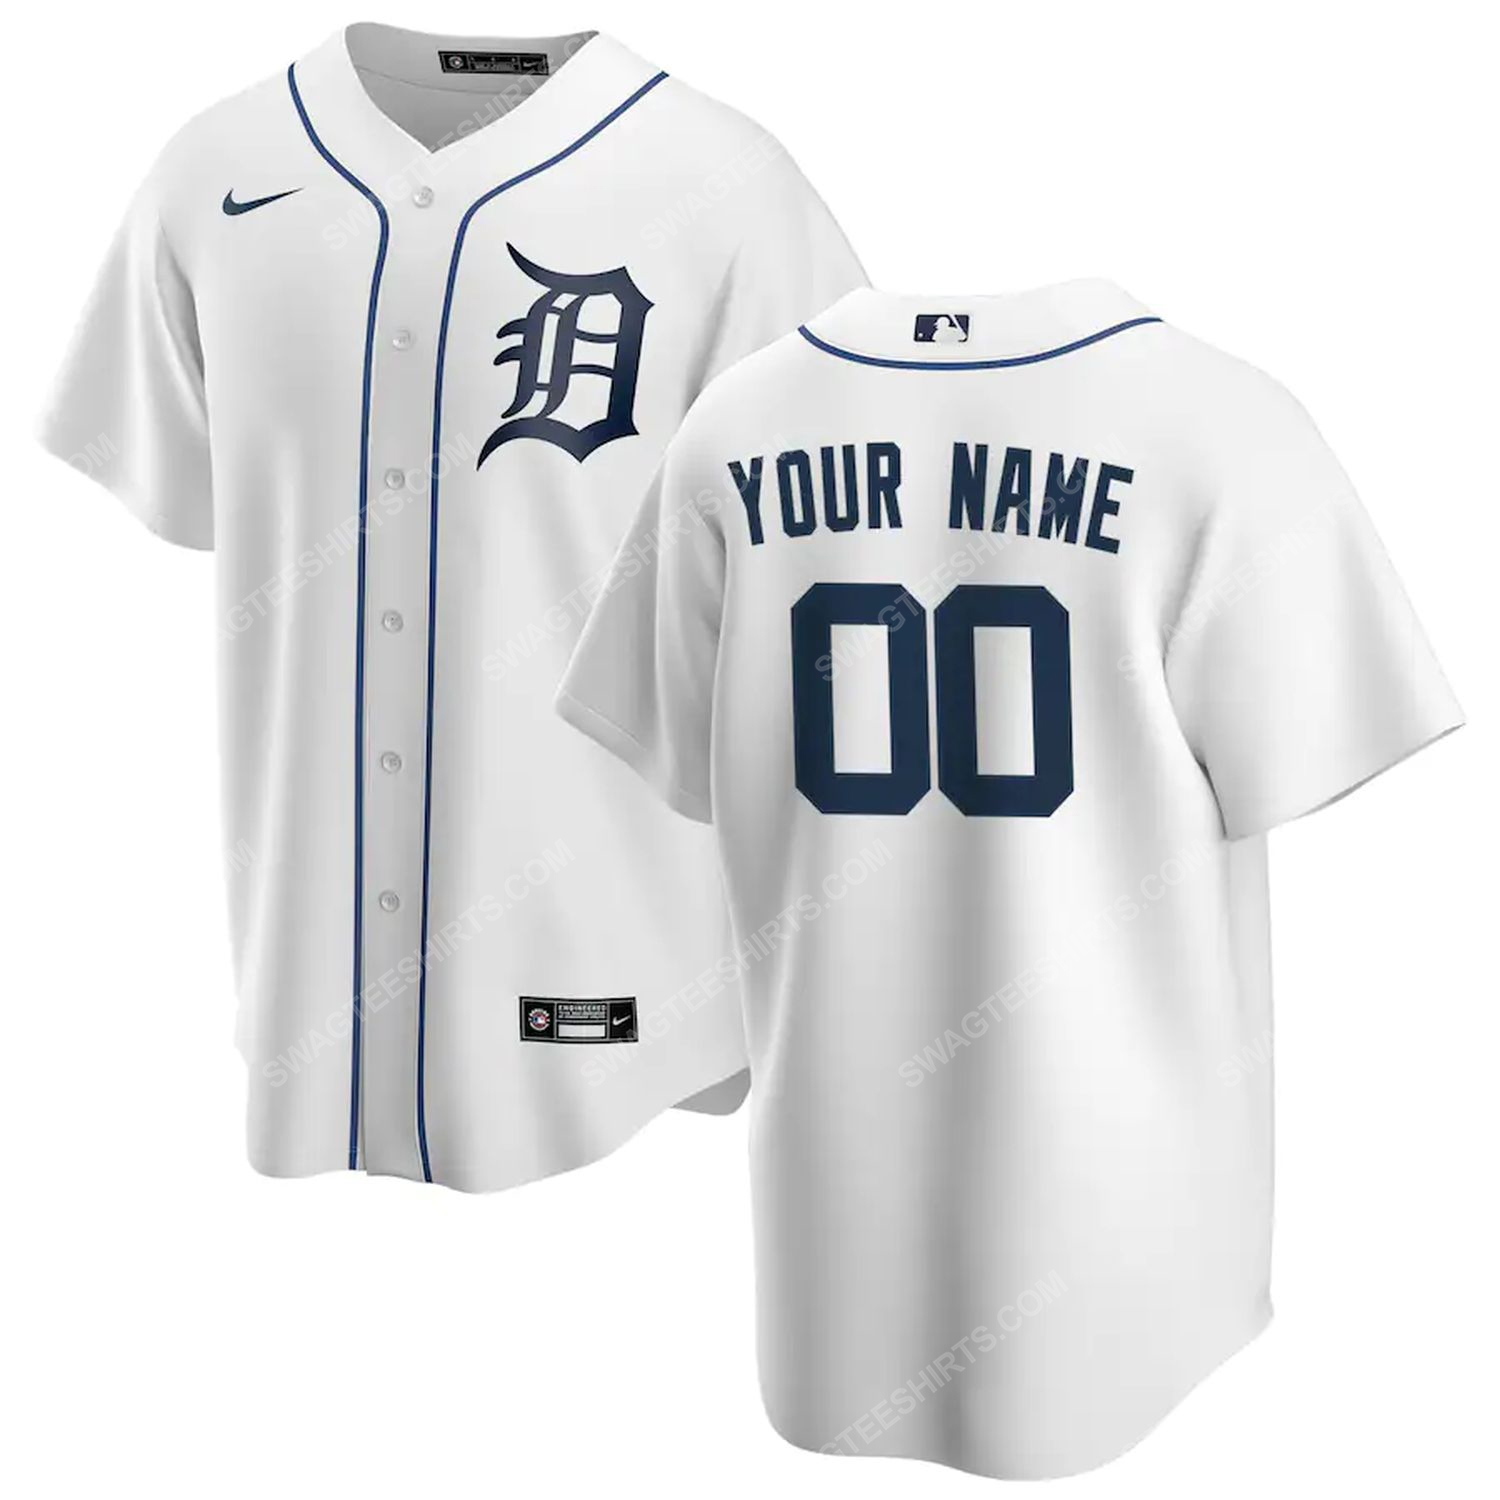 [special edition] Personalized mlb detroit tigers team baseball jersey – maria